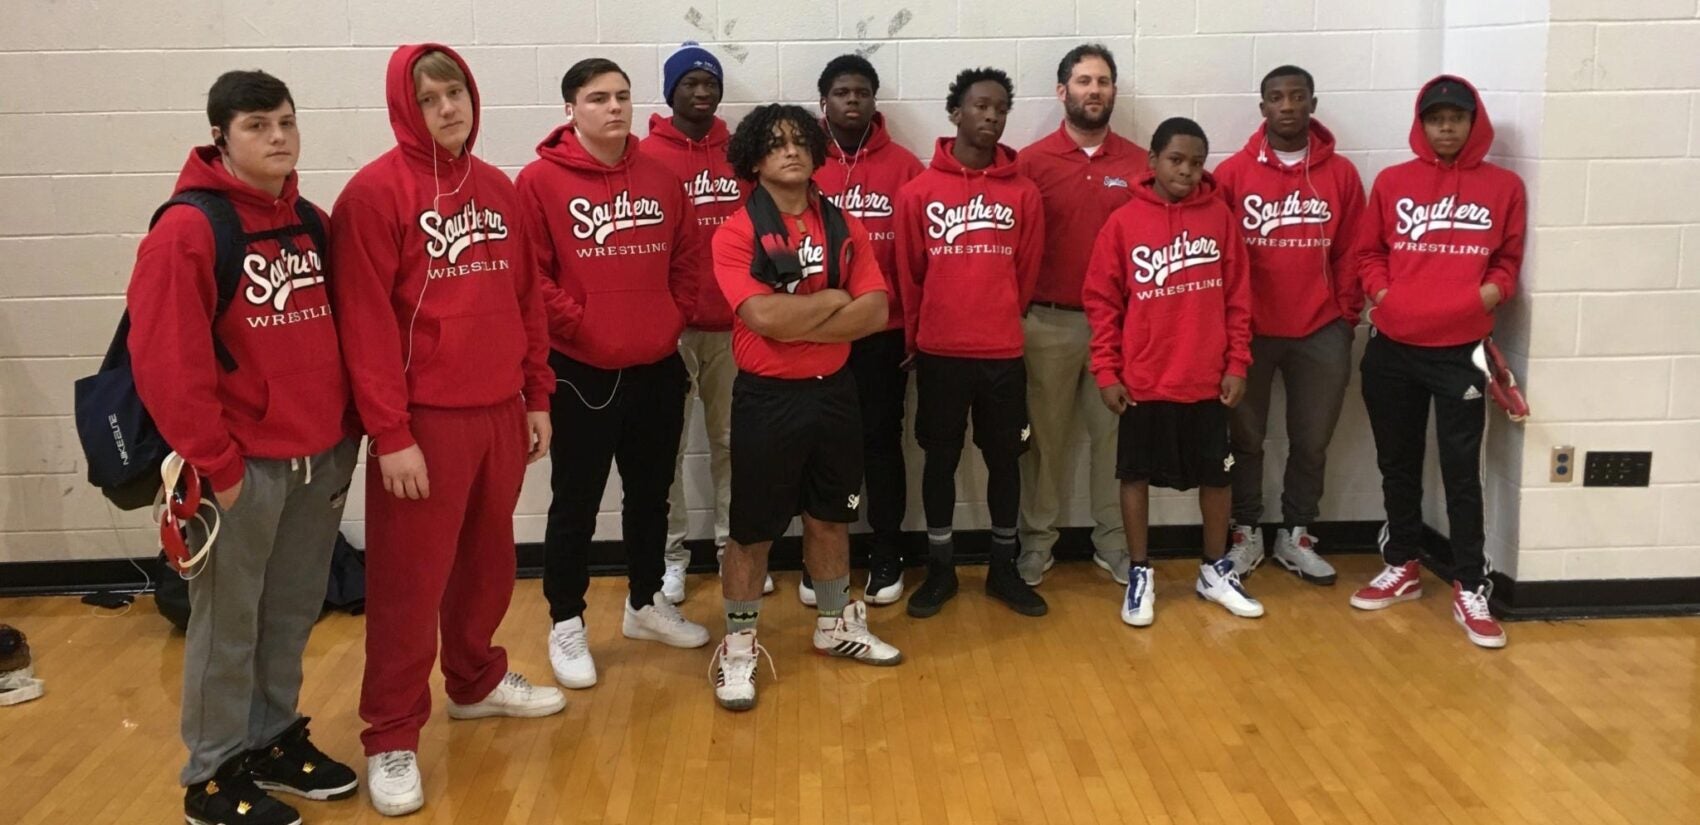 Tahj Williams, third from right, with South Philly High School's wrestling team during the 2017-2018 school year. (Courtsey: of Robert Schloss)